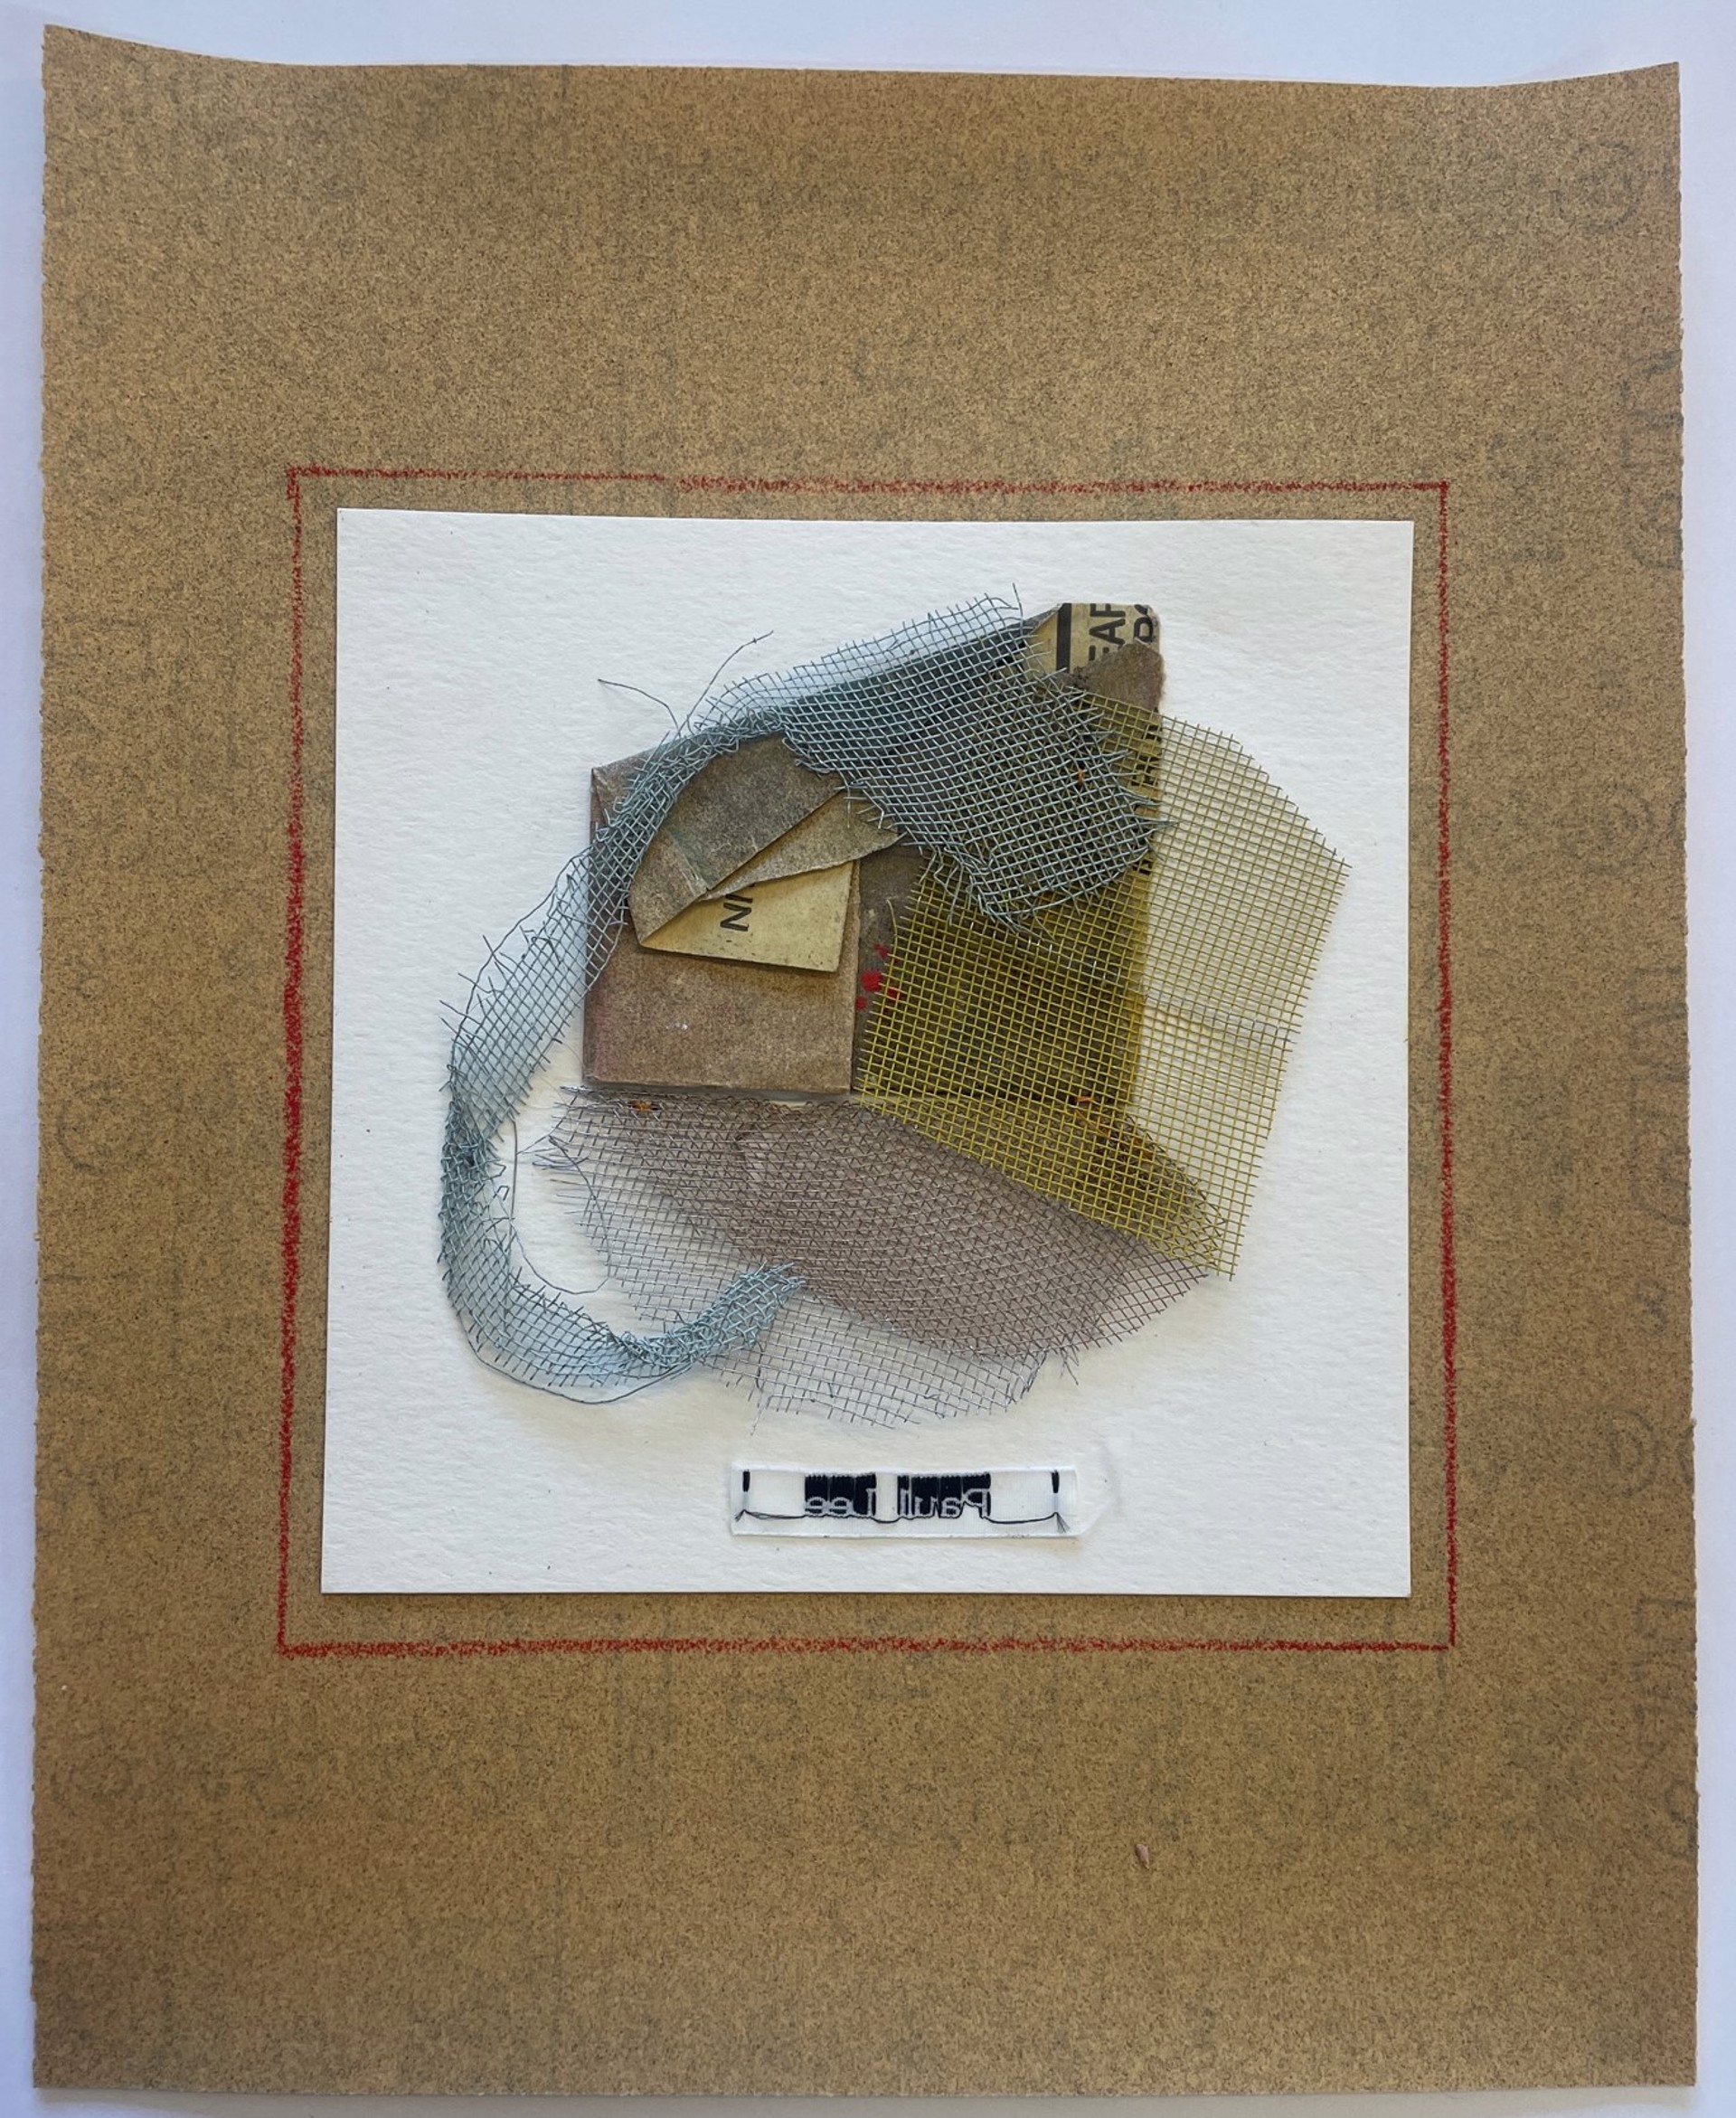 Sandpaper Collage No. 6 by Paul Lee